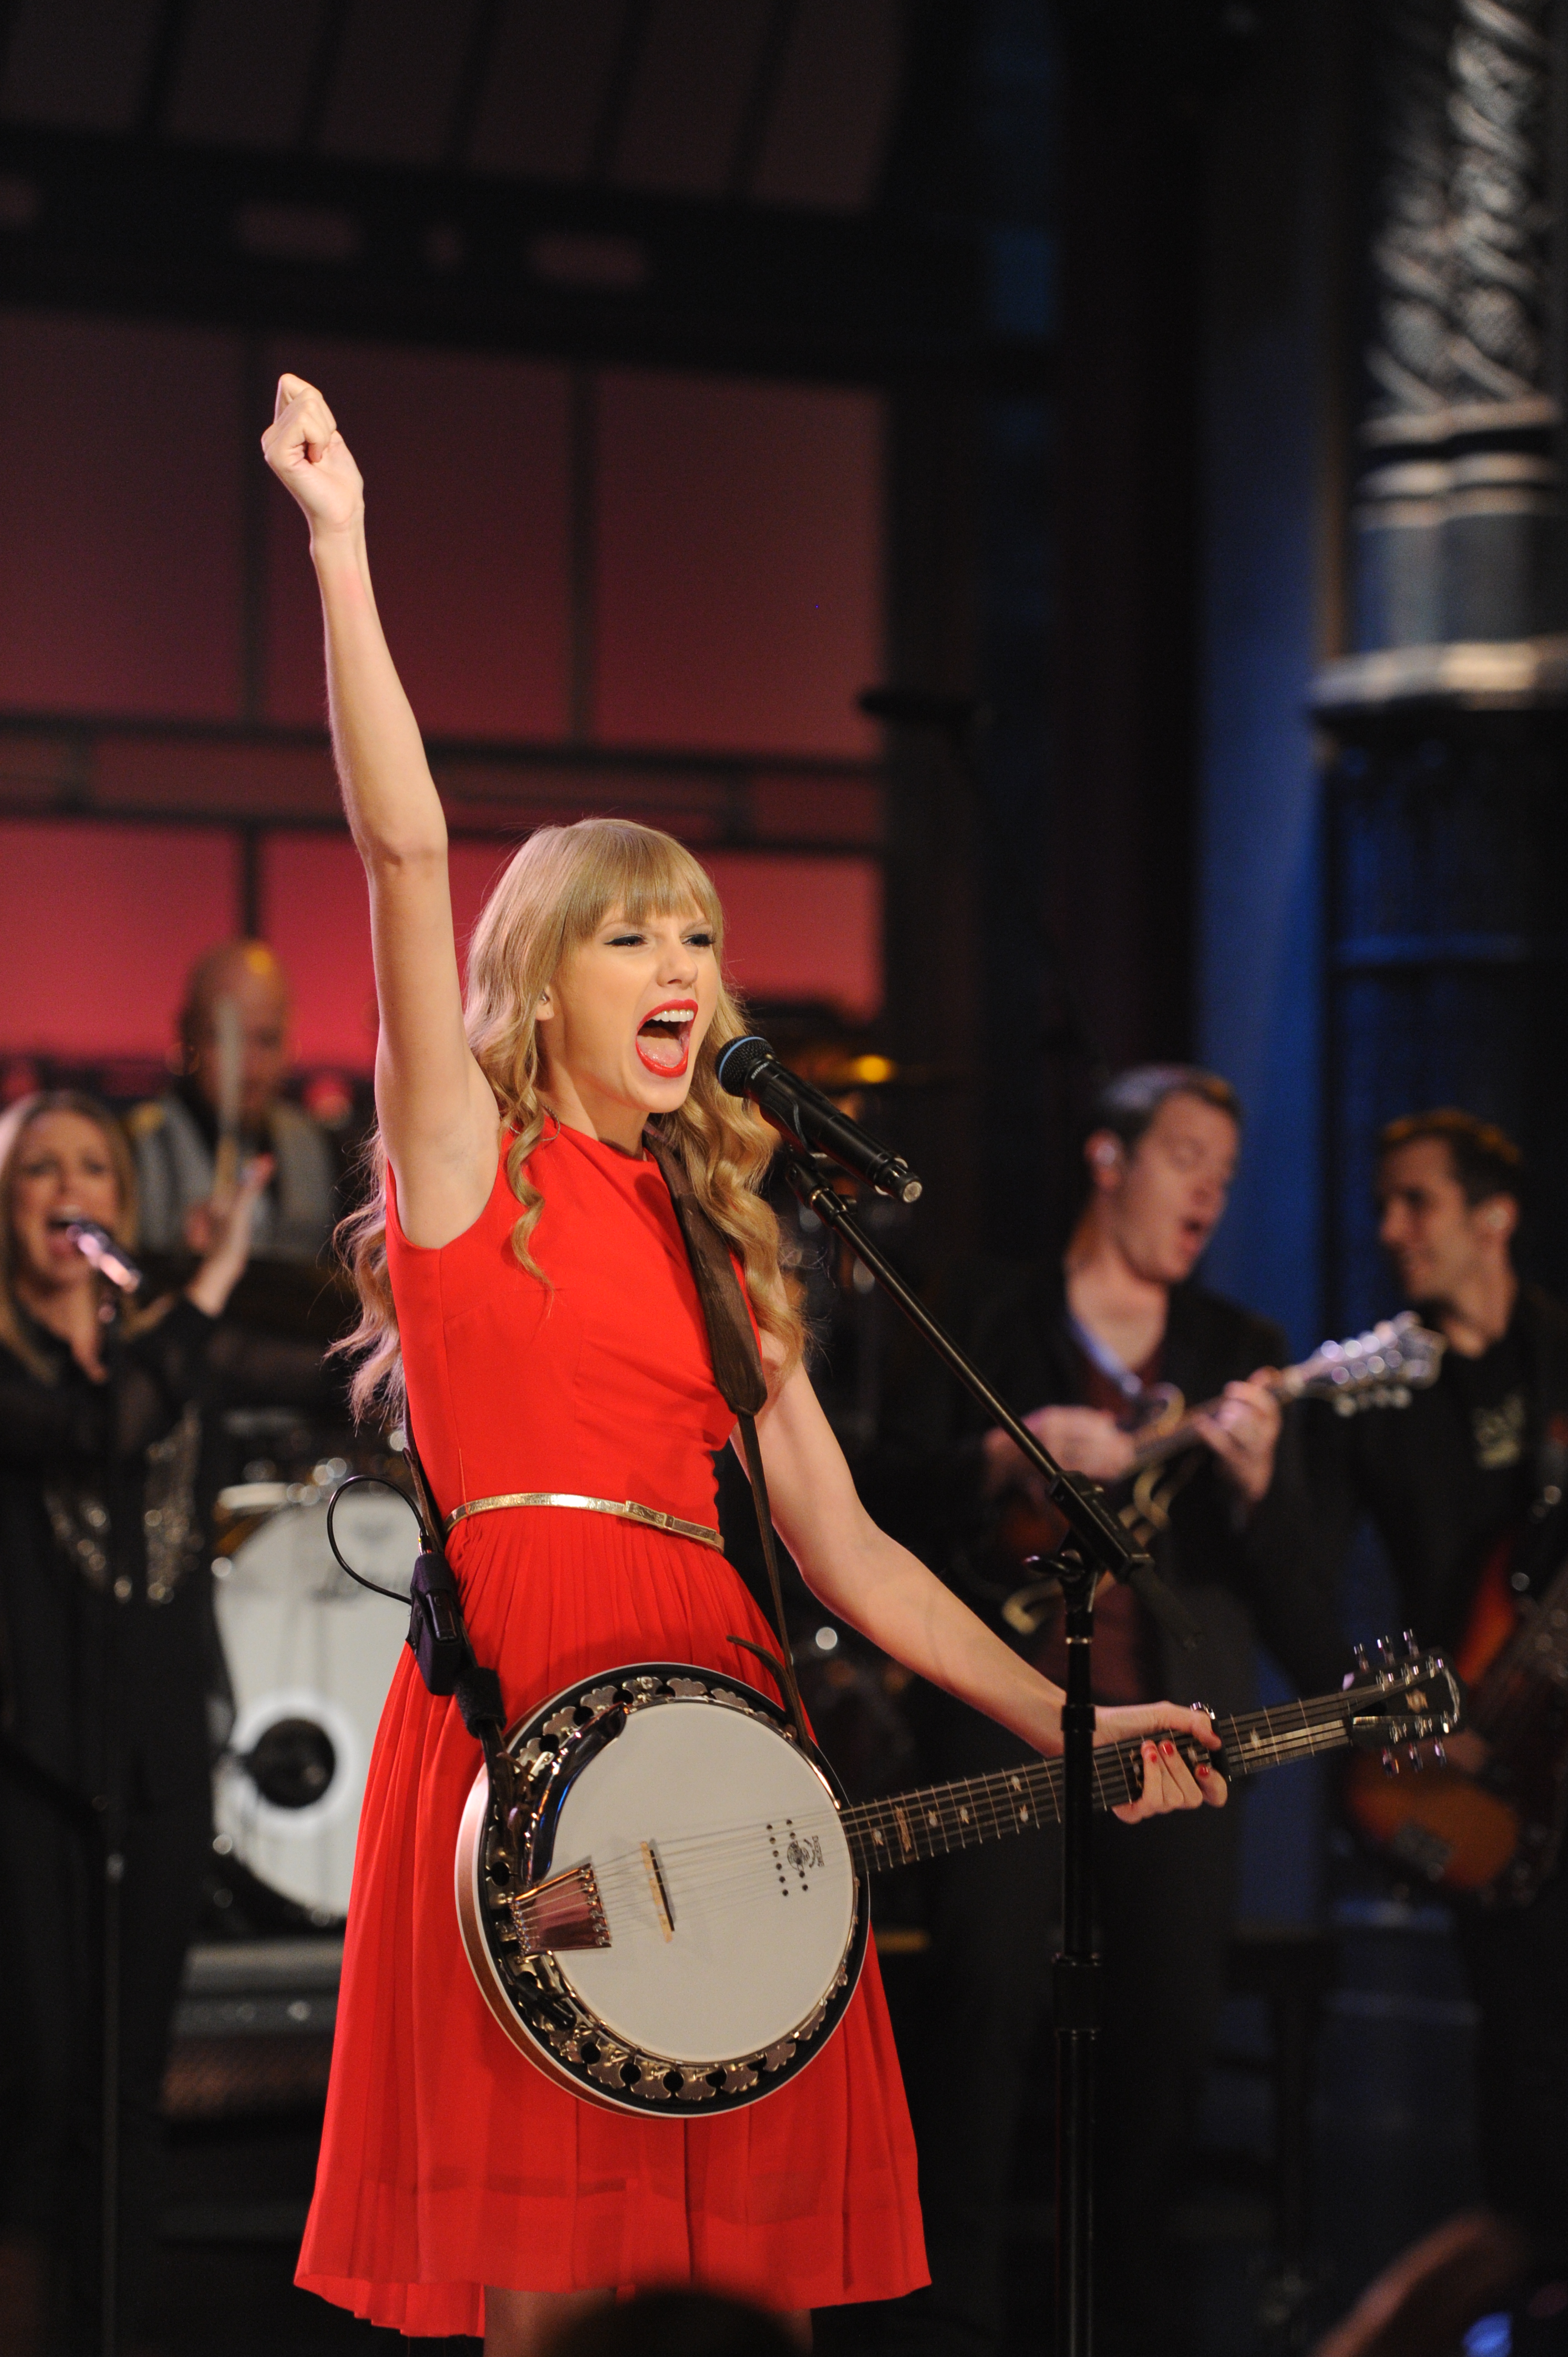 Taylor Swift at the Ed Sullivan Theater in New York 